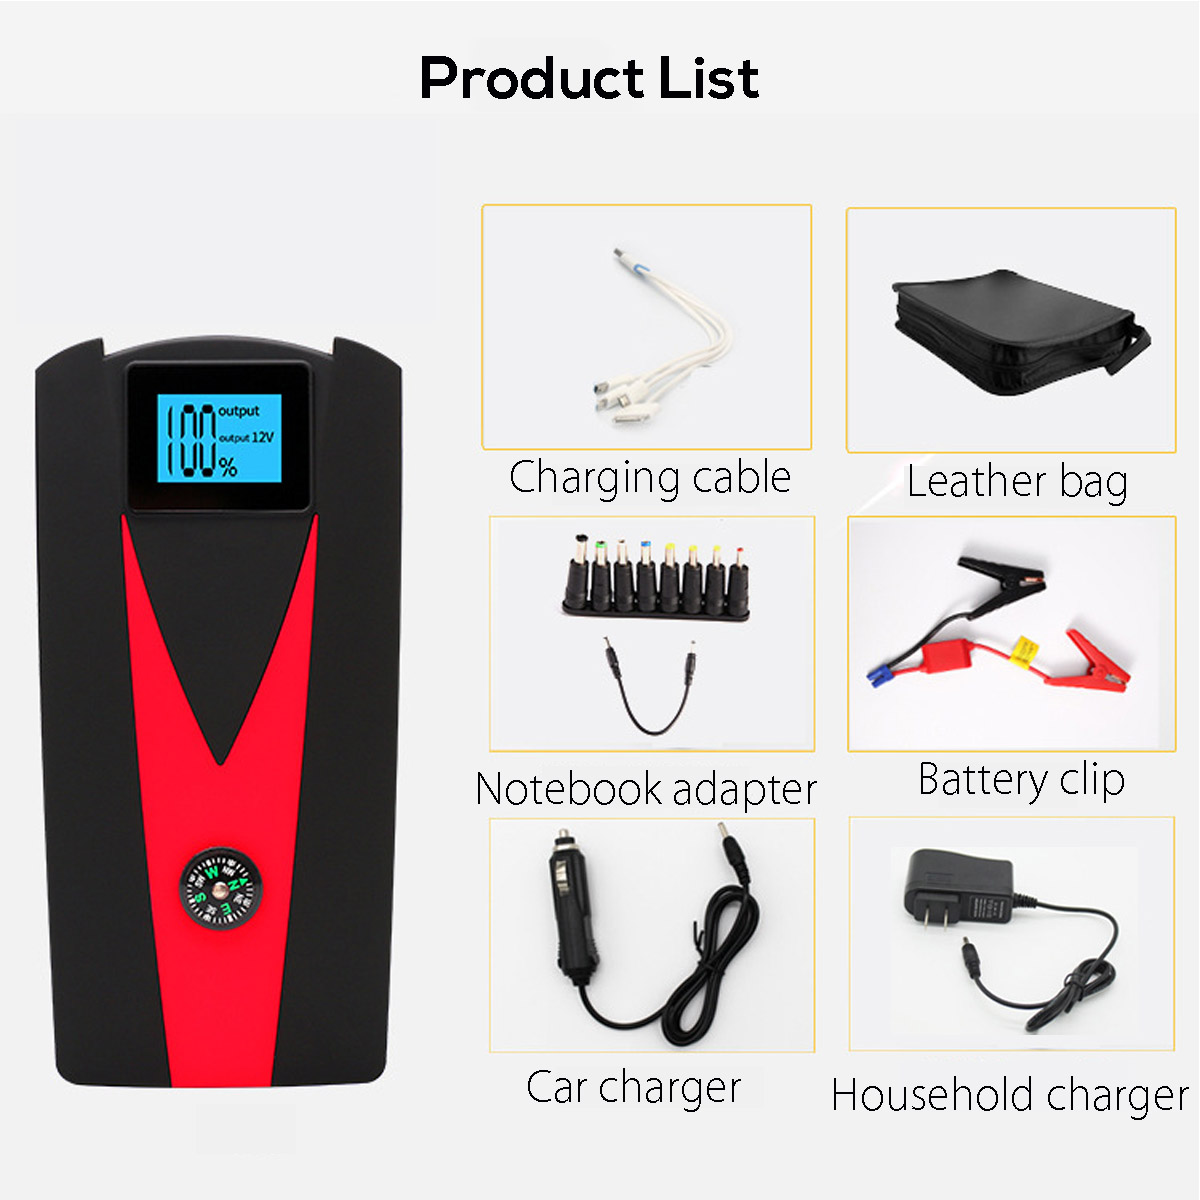 99900-mAh-Dual-USB-Car-Jump-Starter-LCD-Auto-Battery-Booster-Portable-Power-Pack-with-Jumper-Cables-1421905-4